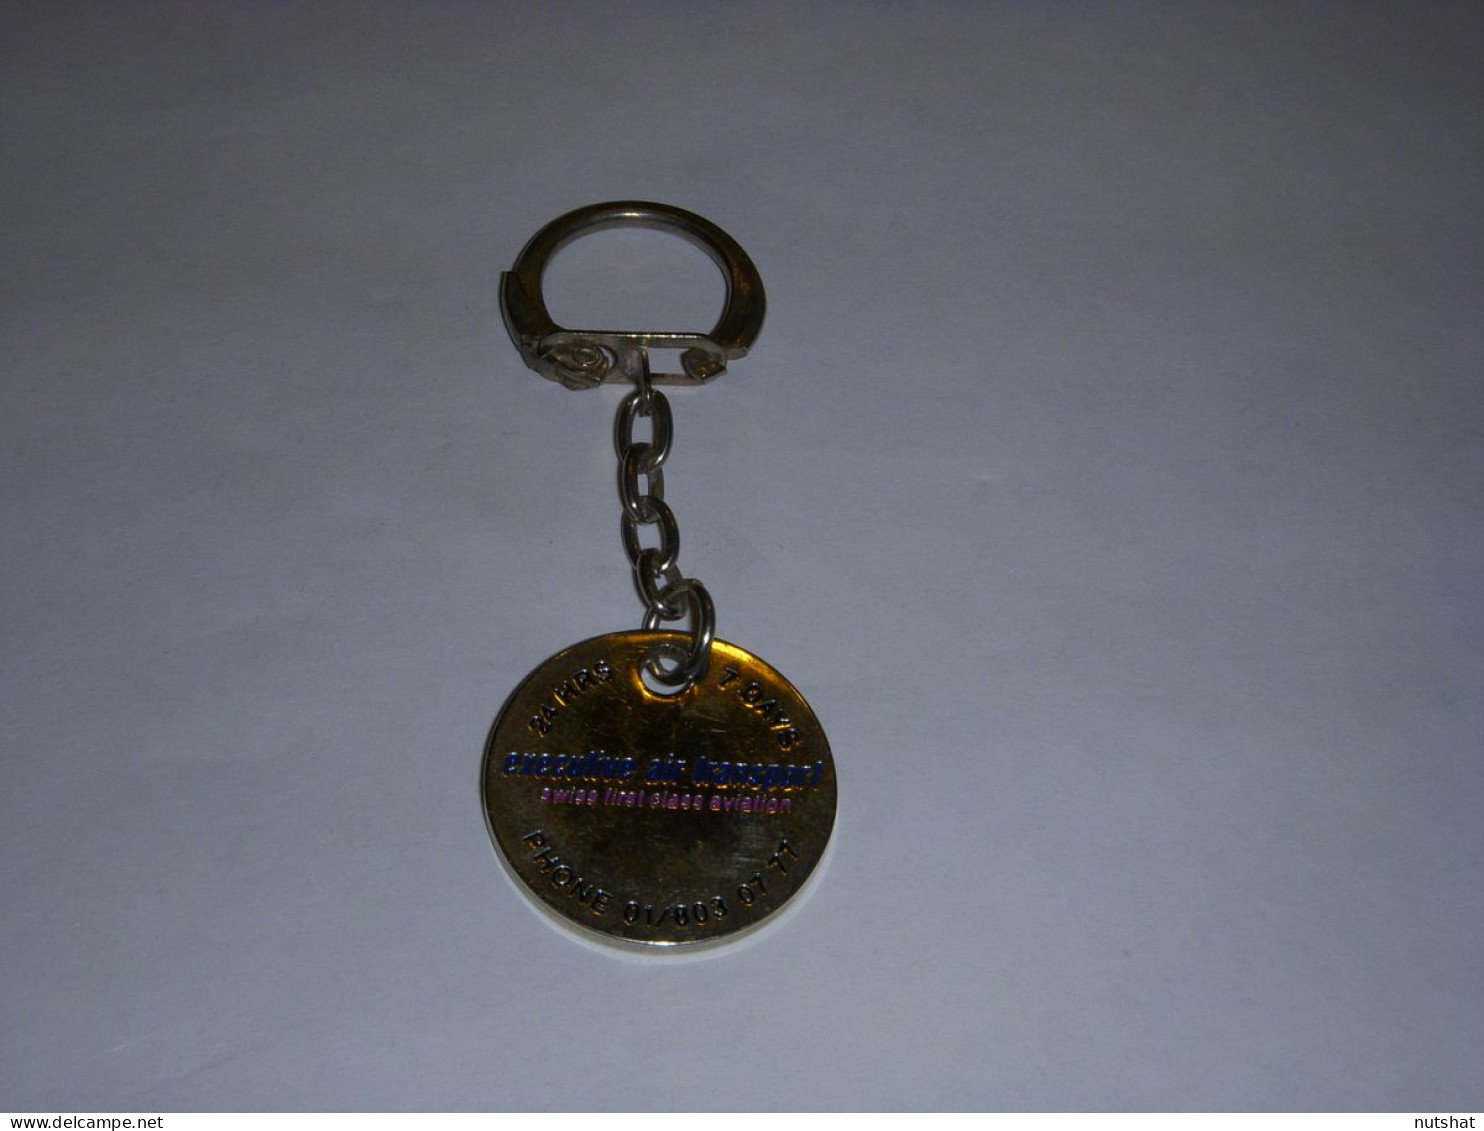 PORTE CLEFS 12 AVIATION EXECUTIVE AIR TRANSPORT ROND ARGENT METAL                - Key-rings